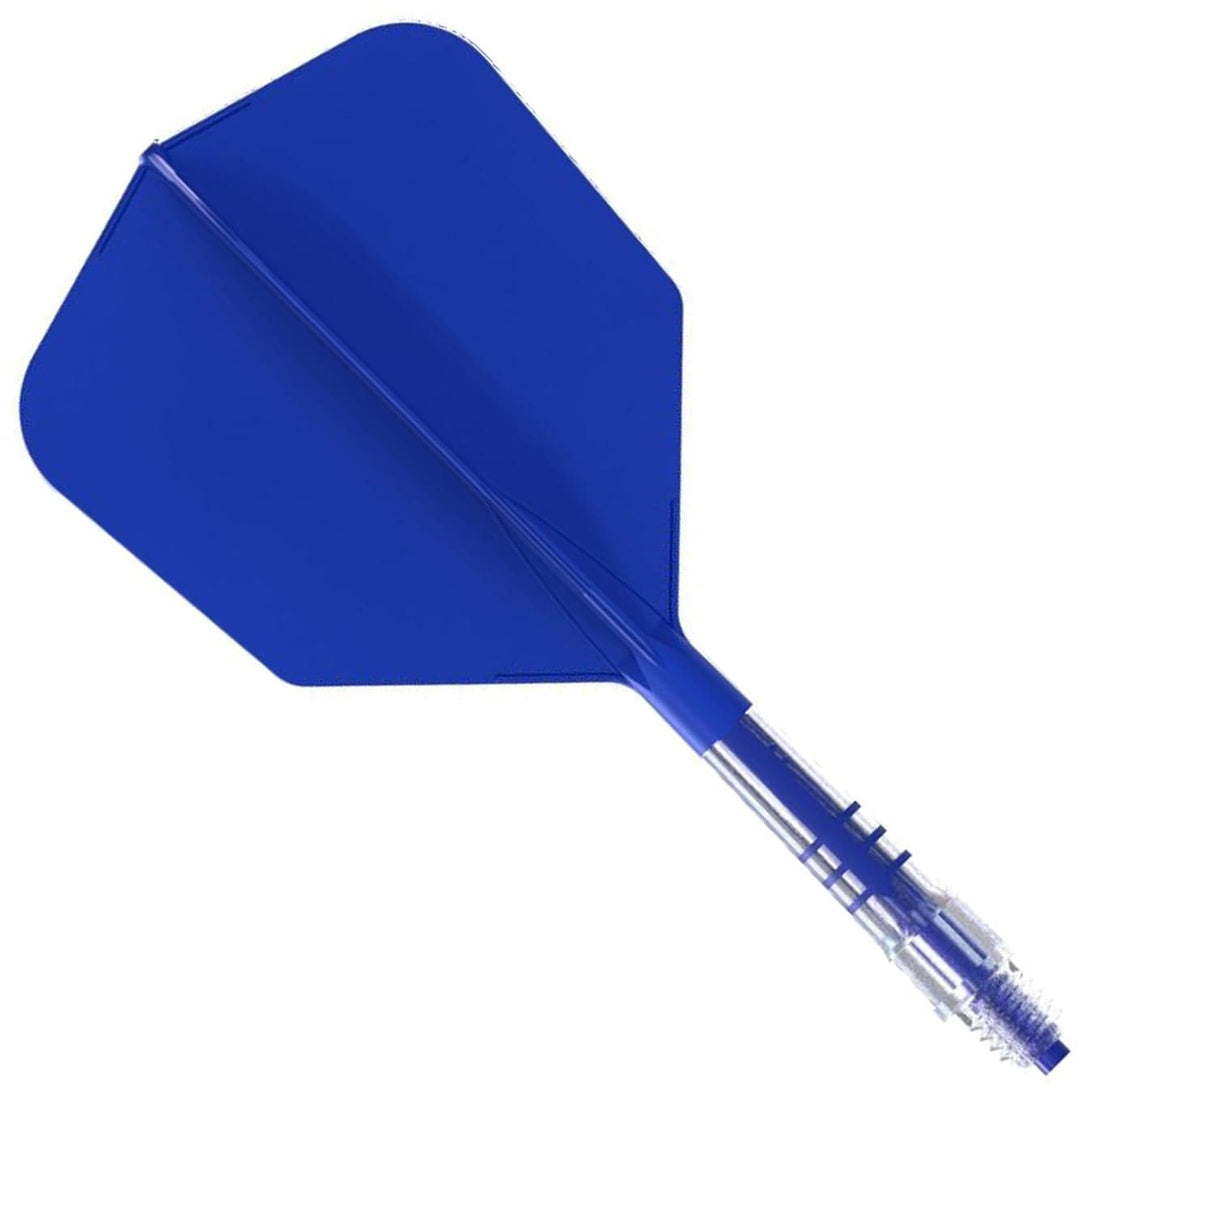 Cuesoul Rost T19 Carbon Fibre - Integrated Dart Shaft and Flights - Big Wing - Blue Size 2